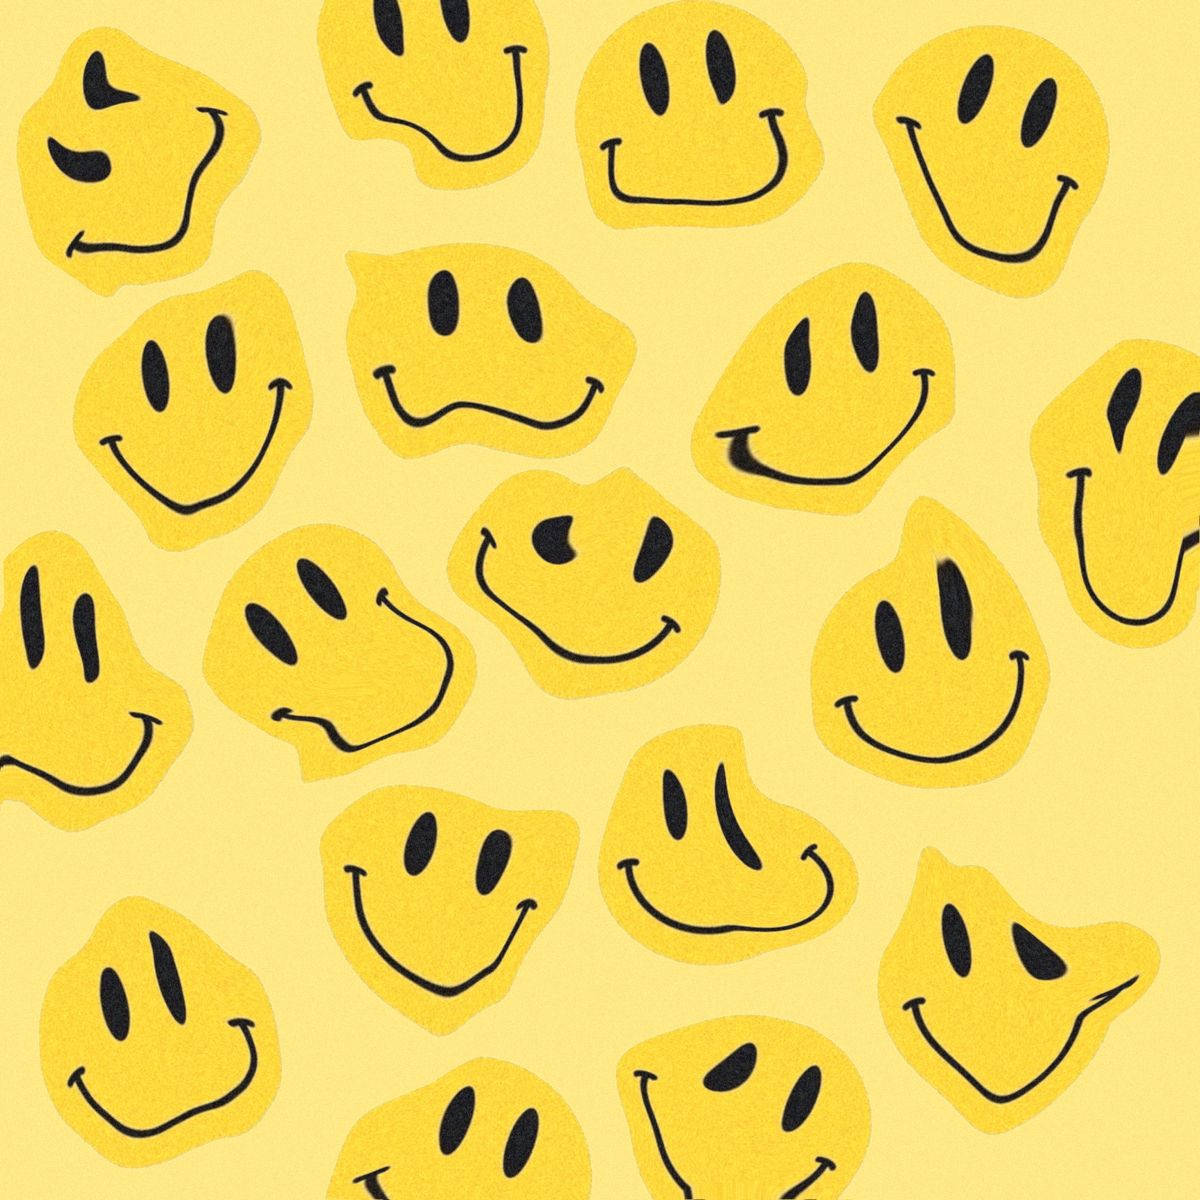 Funny Distorted Smiley Faces Wallpaper